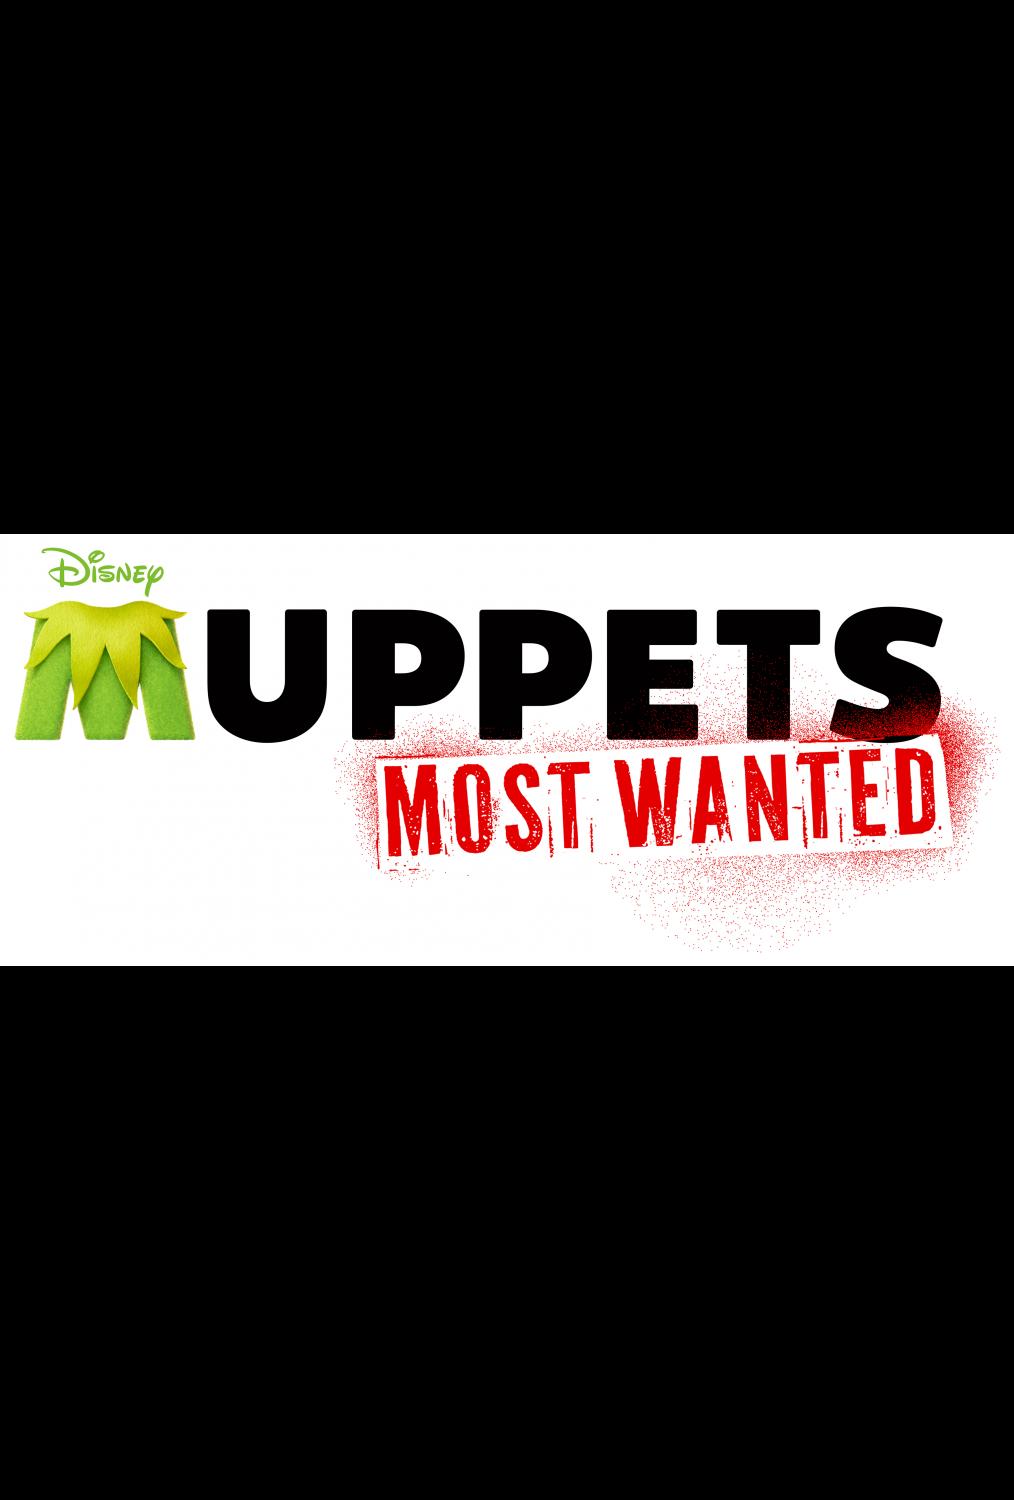 Get Groove’n with Disney’s Muppets Most Wanted! #MuppetsMostWanted #MovesLikeMuppets